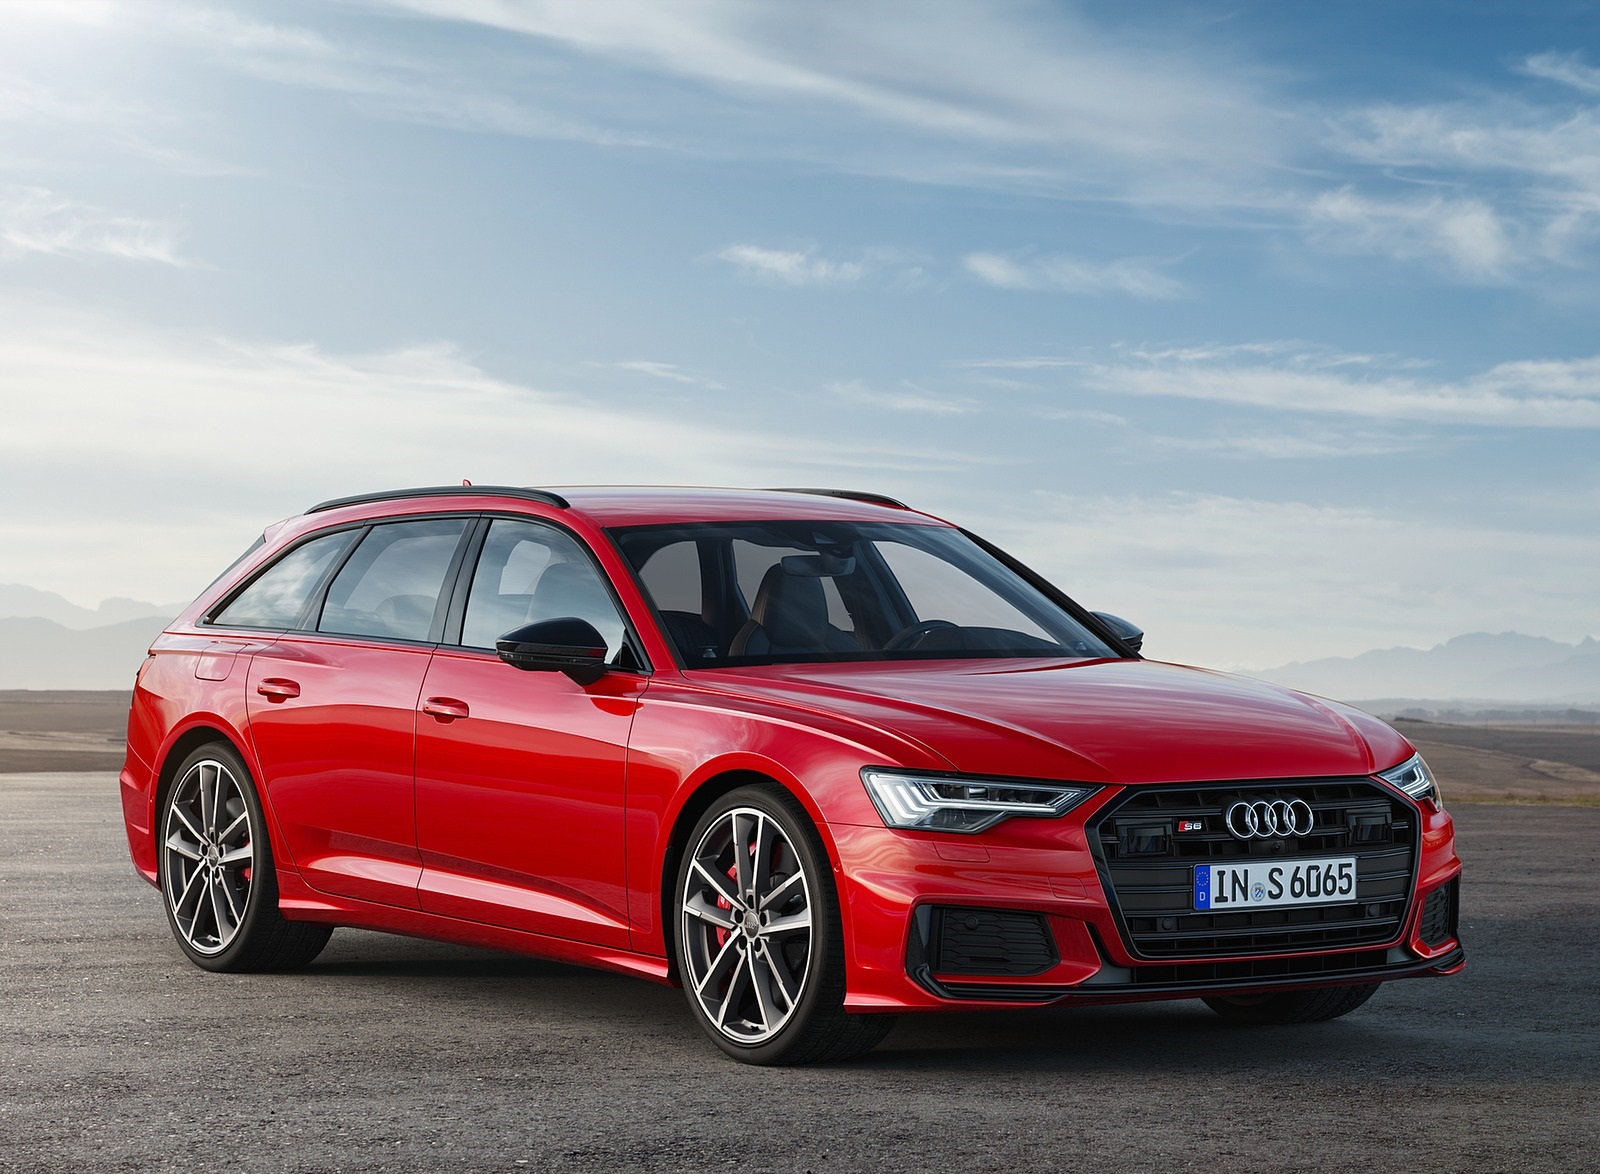 2020 Audi S6 Avant TDI (Color: Tango Red) Front Three-Quarter Wallpapers  #31 of 60